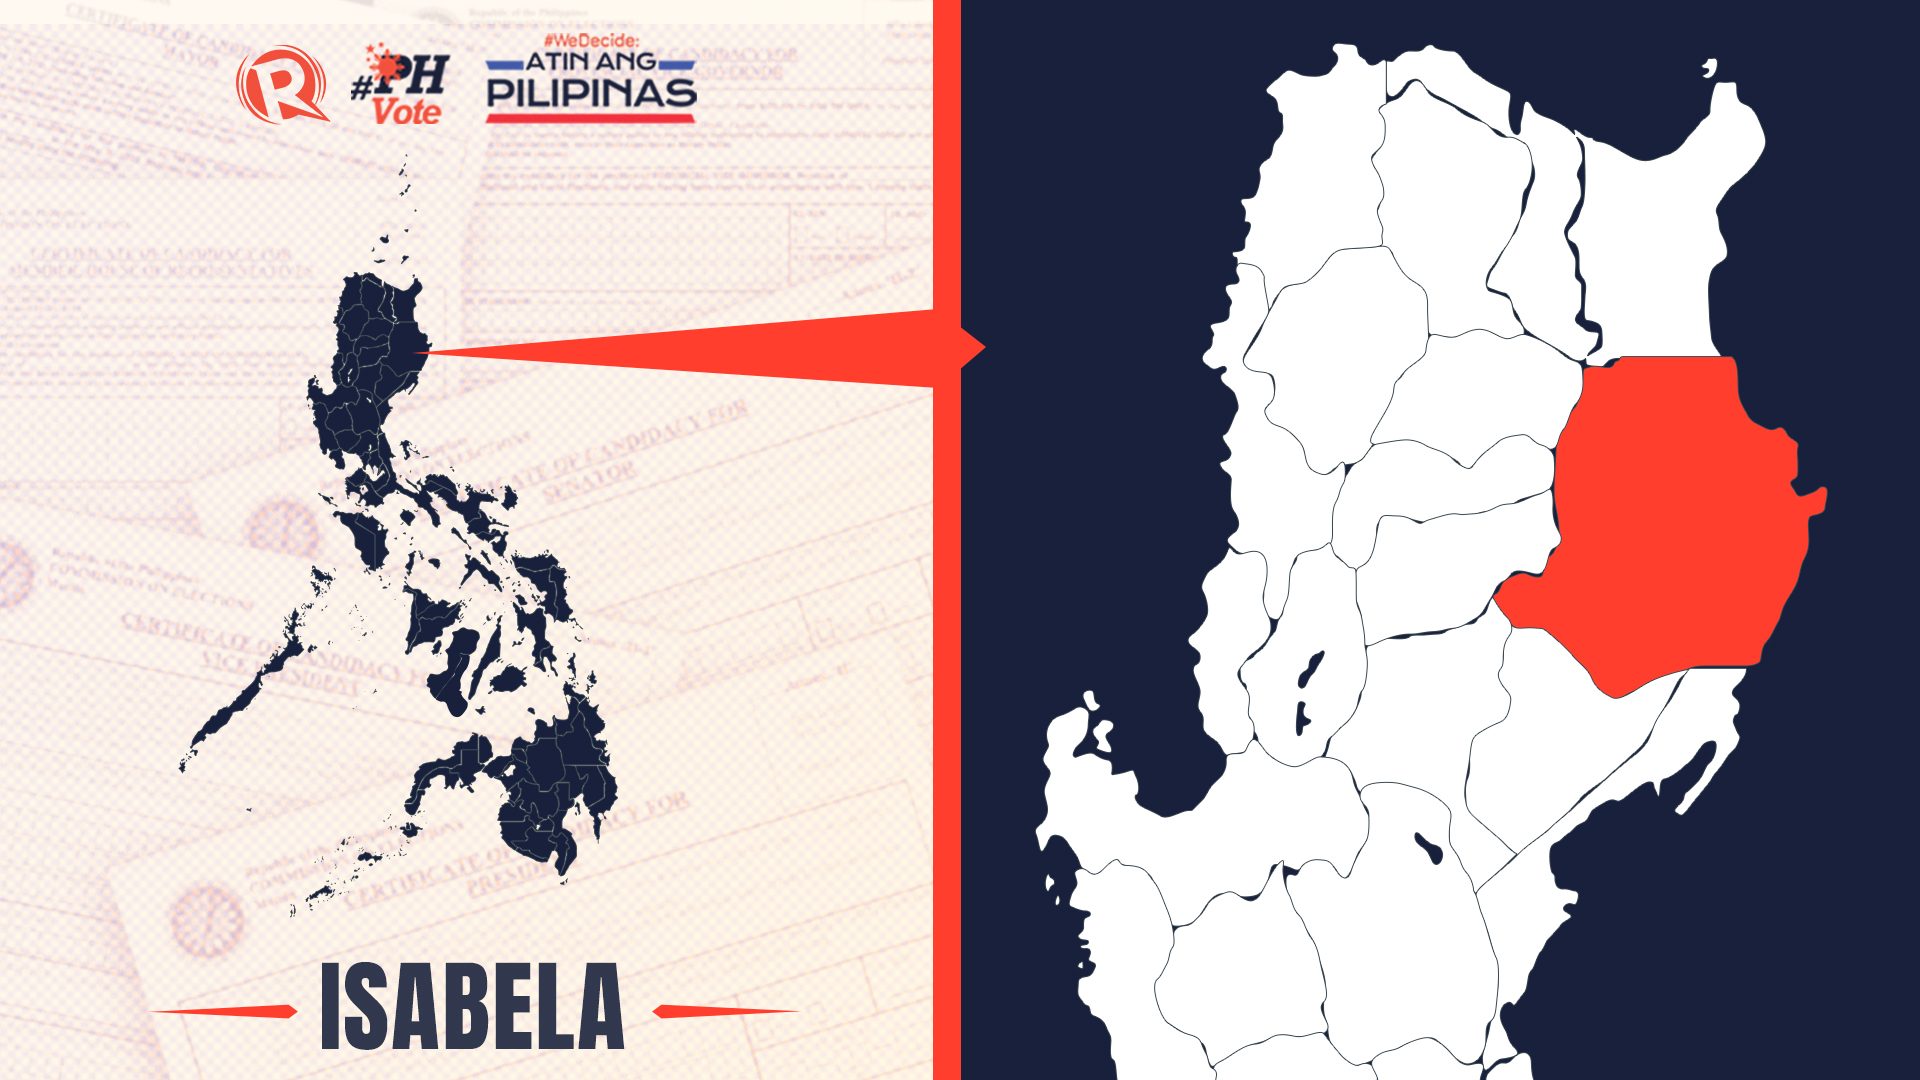 LIST: Who is running in Isabela in the 2022 Philippine elections?